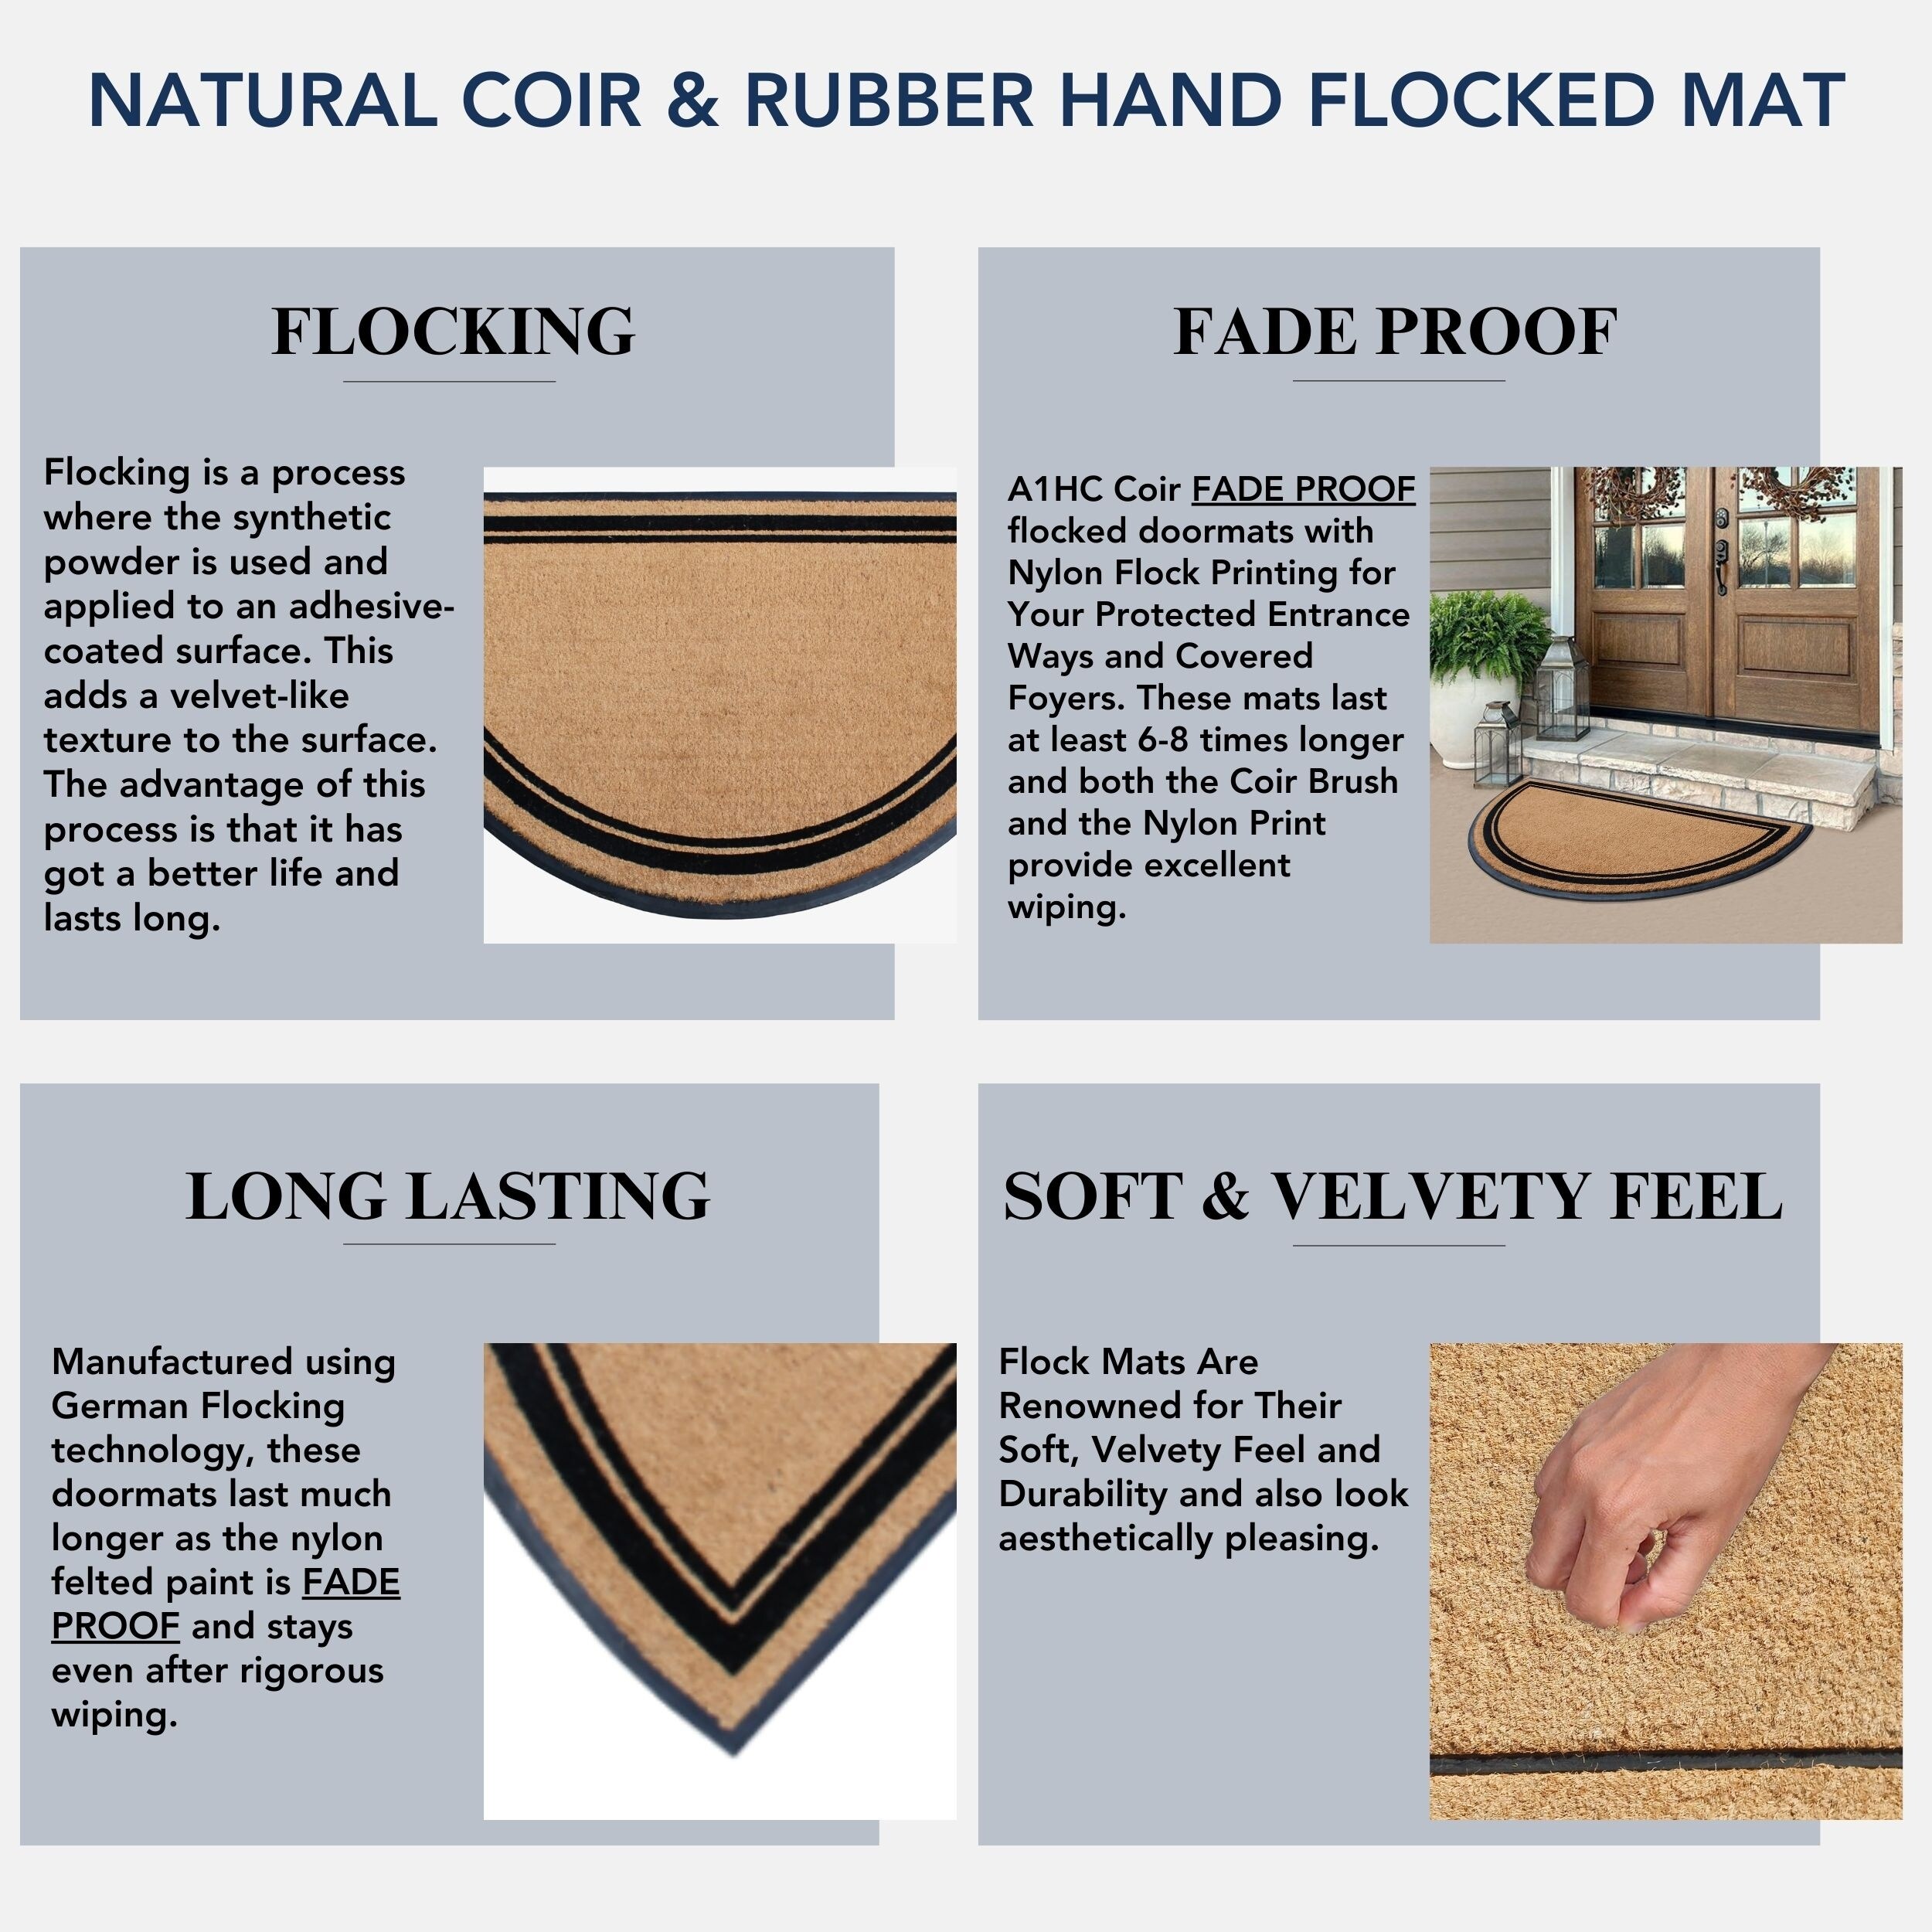 https://ak1.ostkcdn.com/images/products/is/images/direct/f05f235d489361d19da1fa3b0ab77da4fefcfddb/A1HC-Natural-Coir-%26-Rubber-Hand-Flocked-Large-Door-Mat-36%22x72%22%2C-Heavy-Duty%2C-Long-Lasting-Thick-Durable-Doormats-for-Entrance.jpg